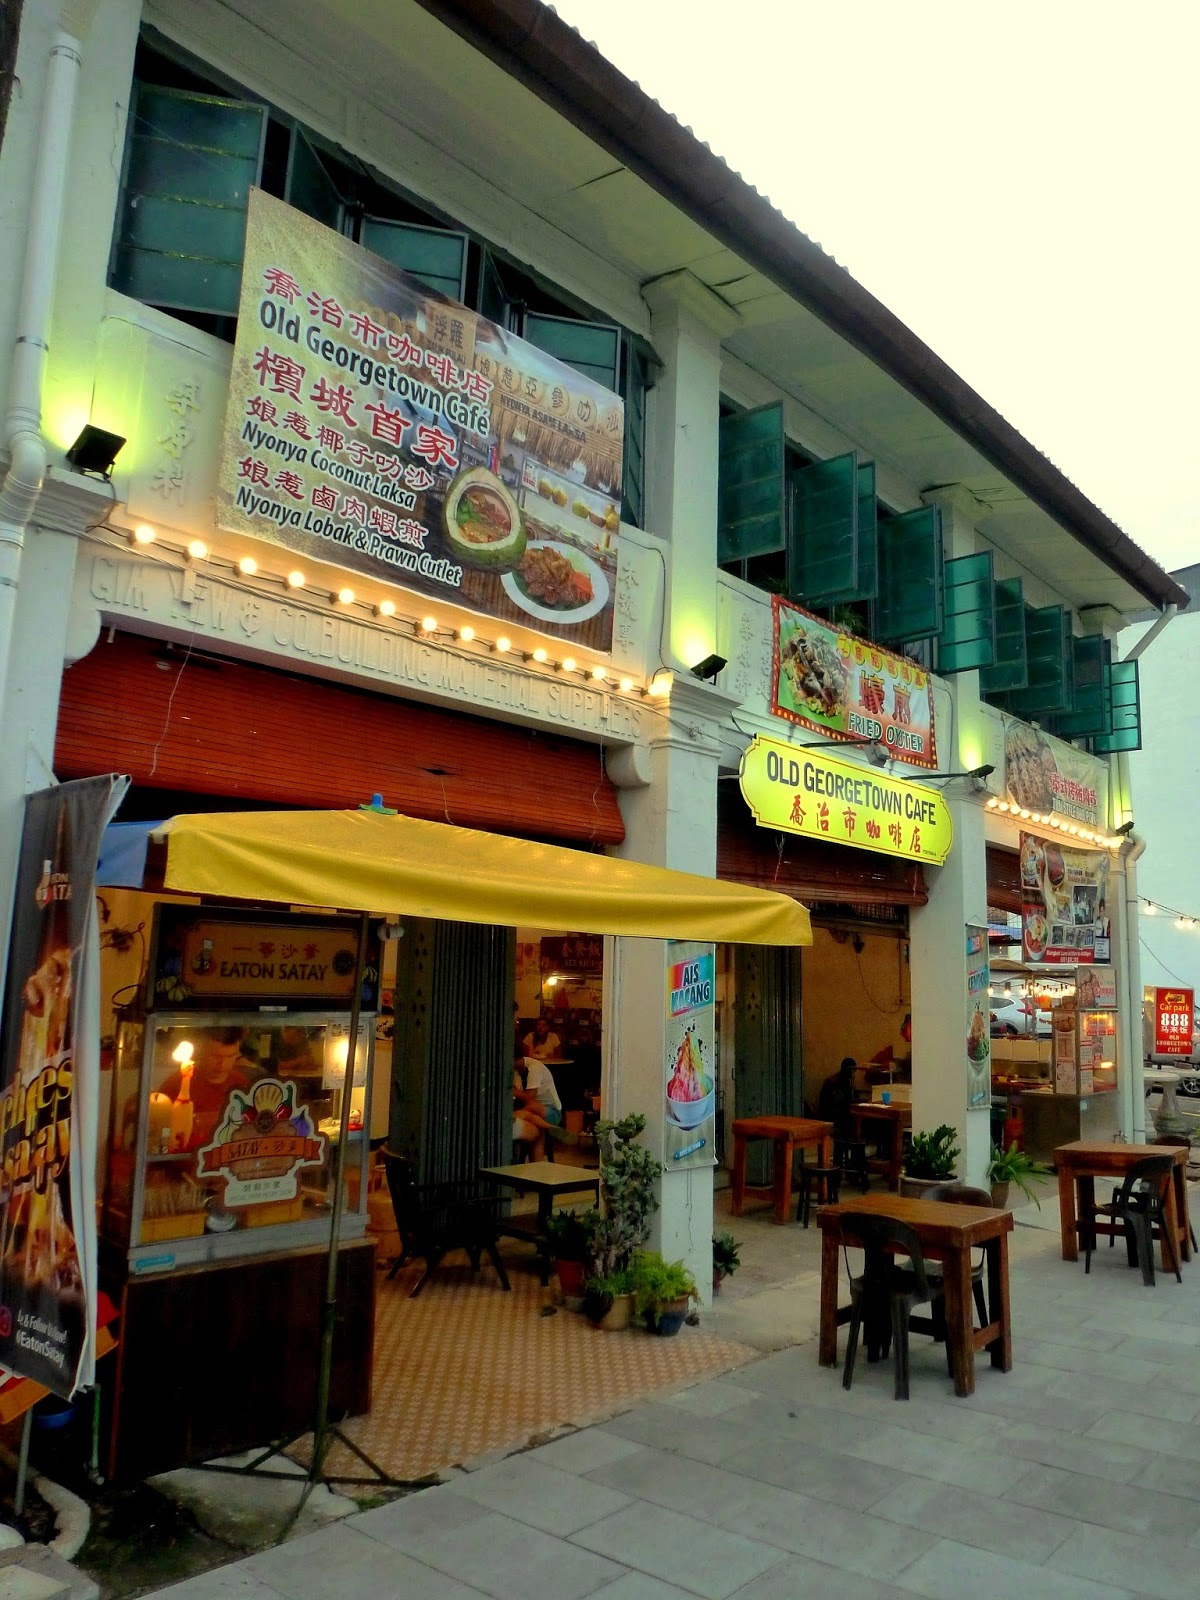 Penang Food For Thought: Old Georgetown Cafe